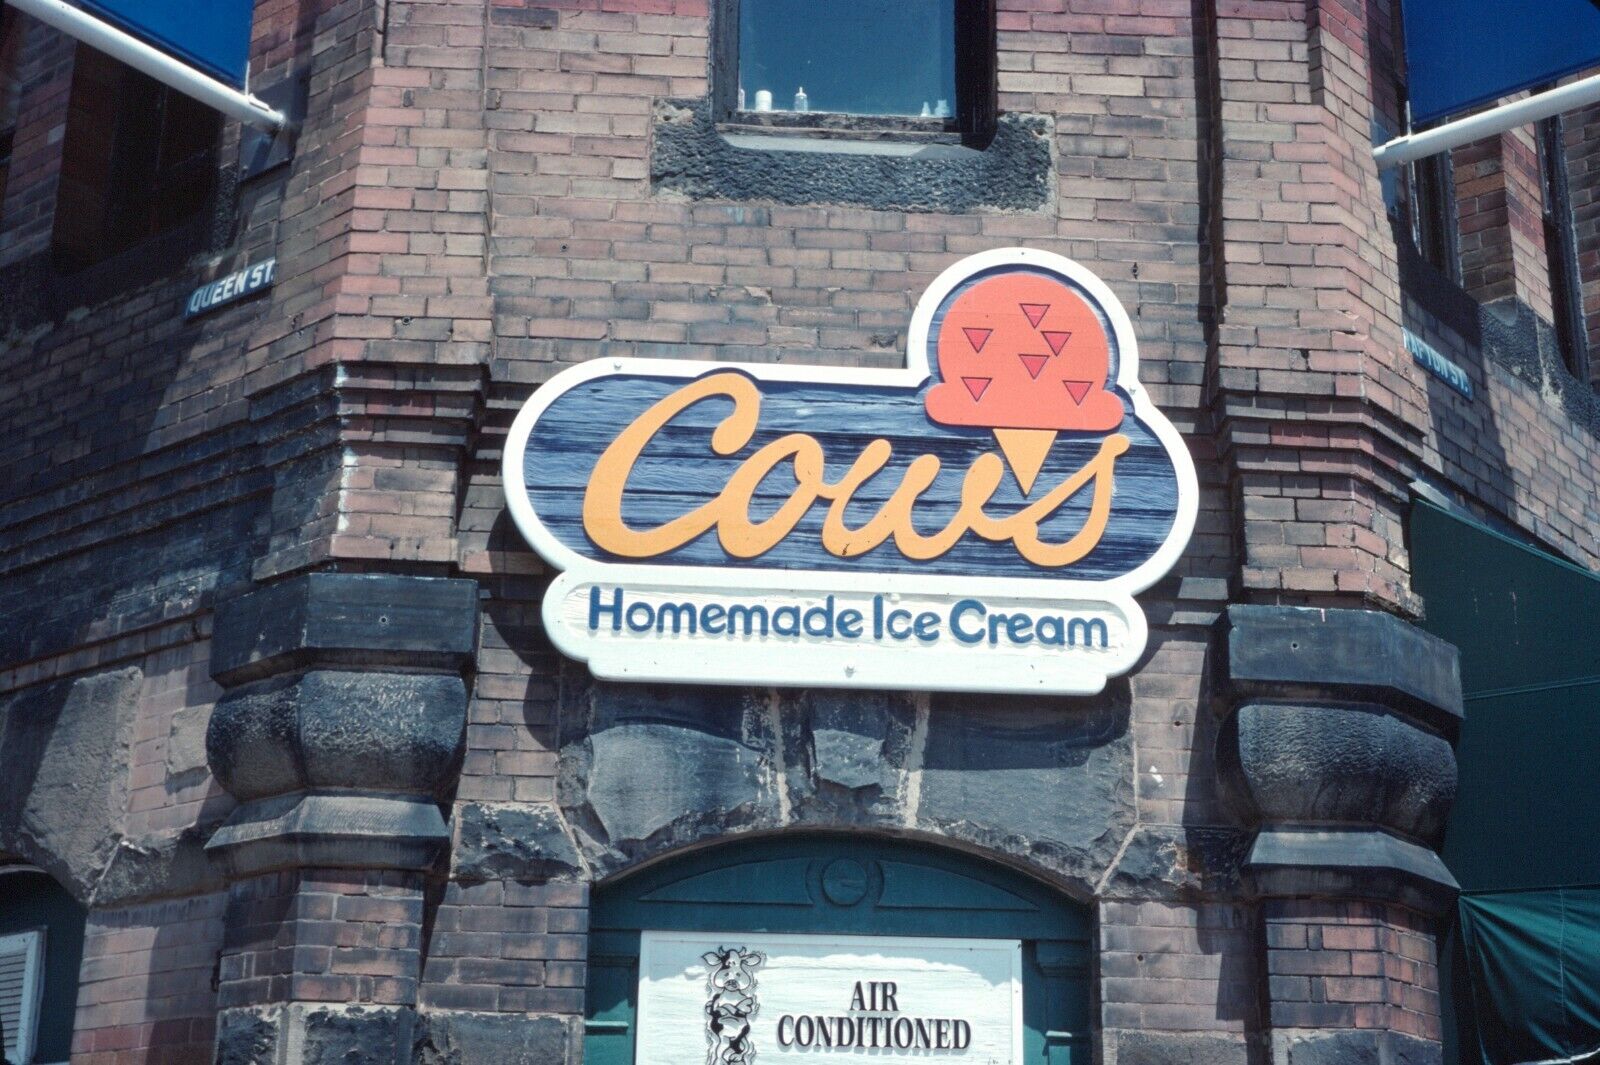 1989 Cow\'s Homemade Ice Cream Shop Sign Canada 80s Vintage 35mm Slide